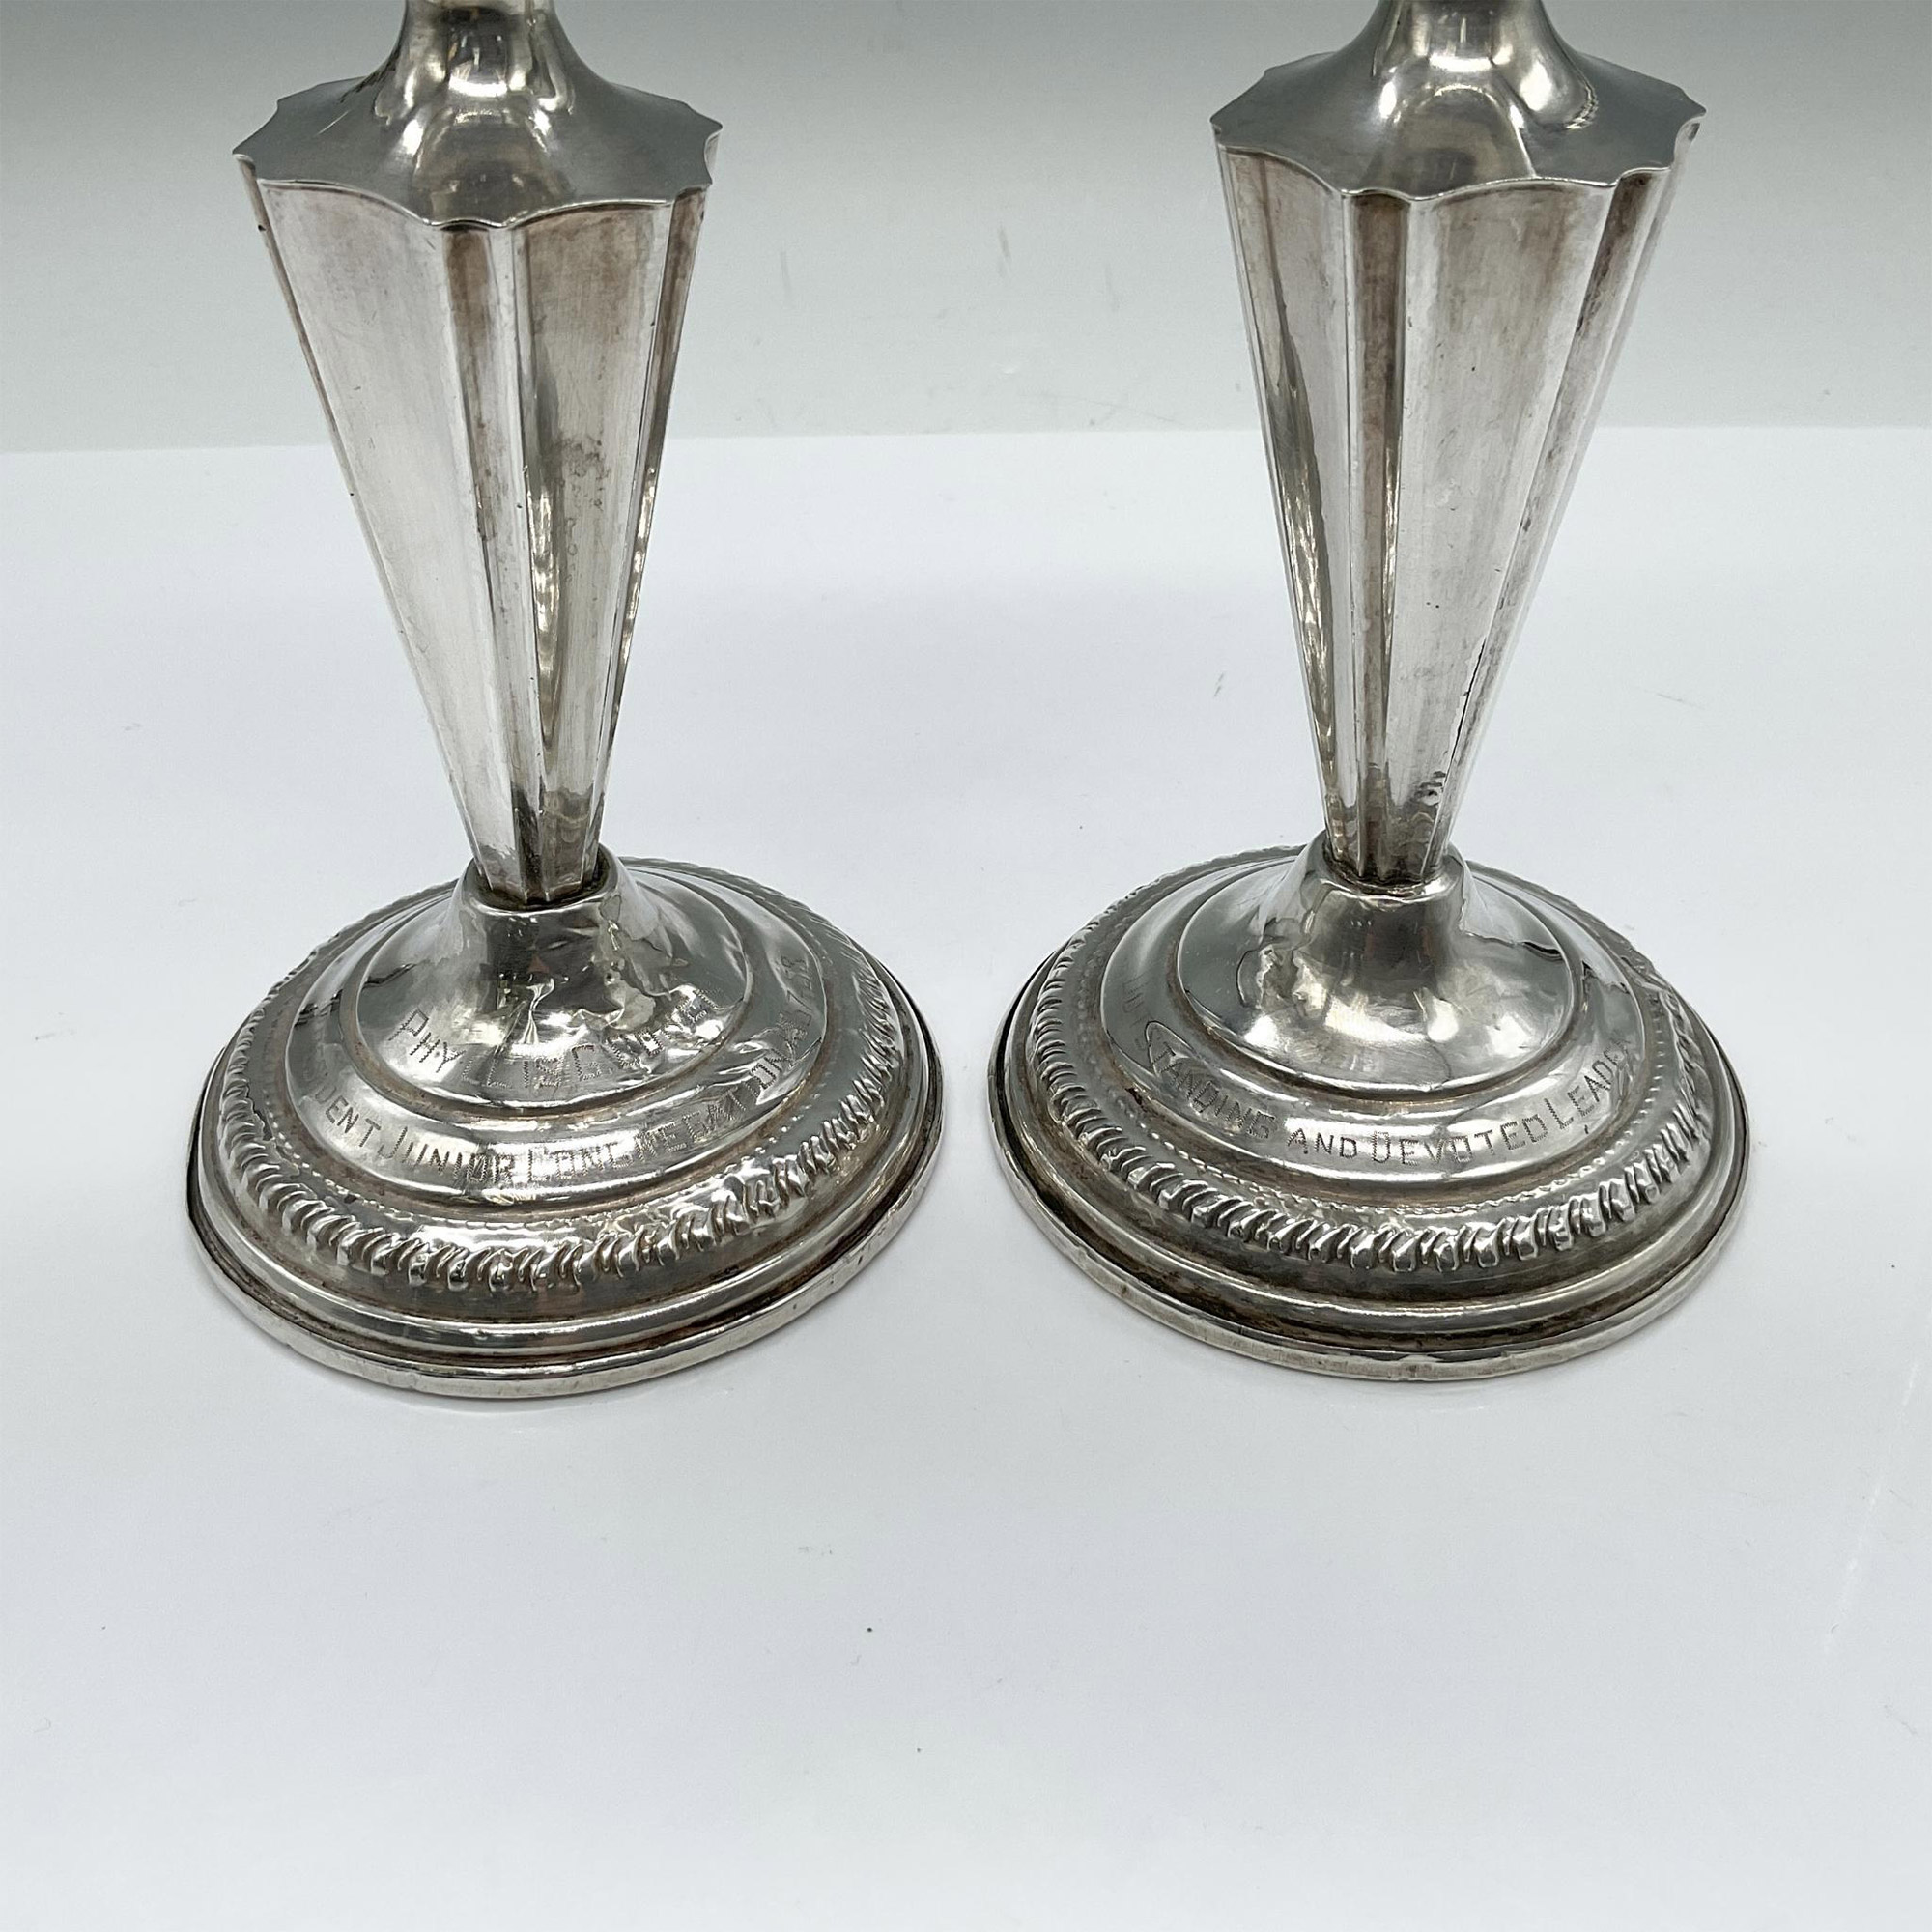 Pair of Arrowsmith Weighted Sterling Silver Candles Holders - Image 2 of 4